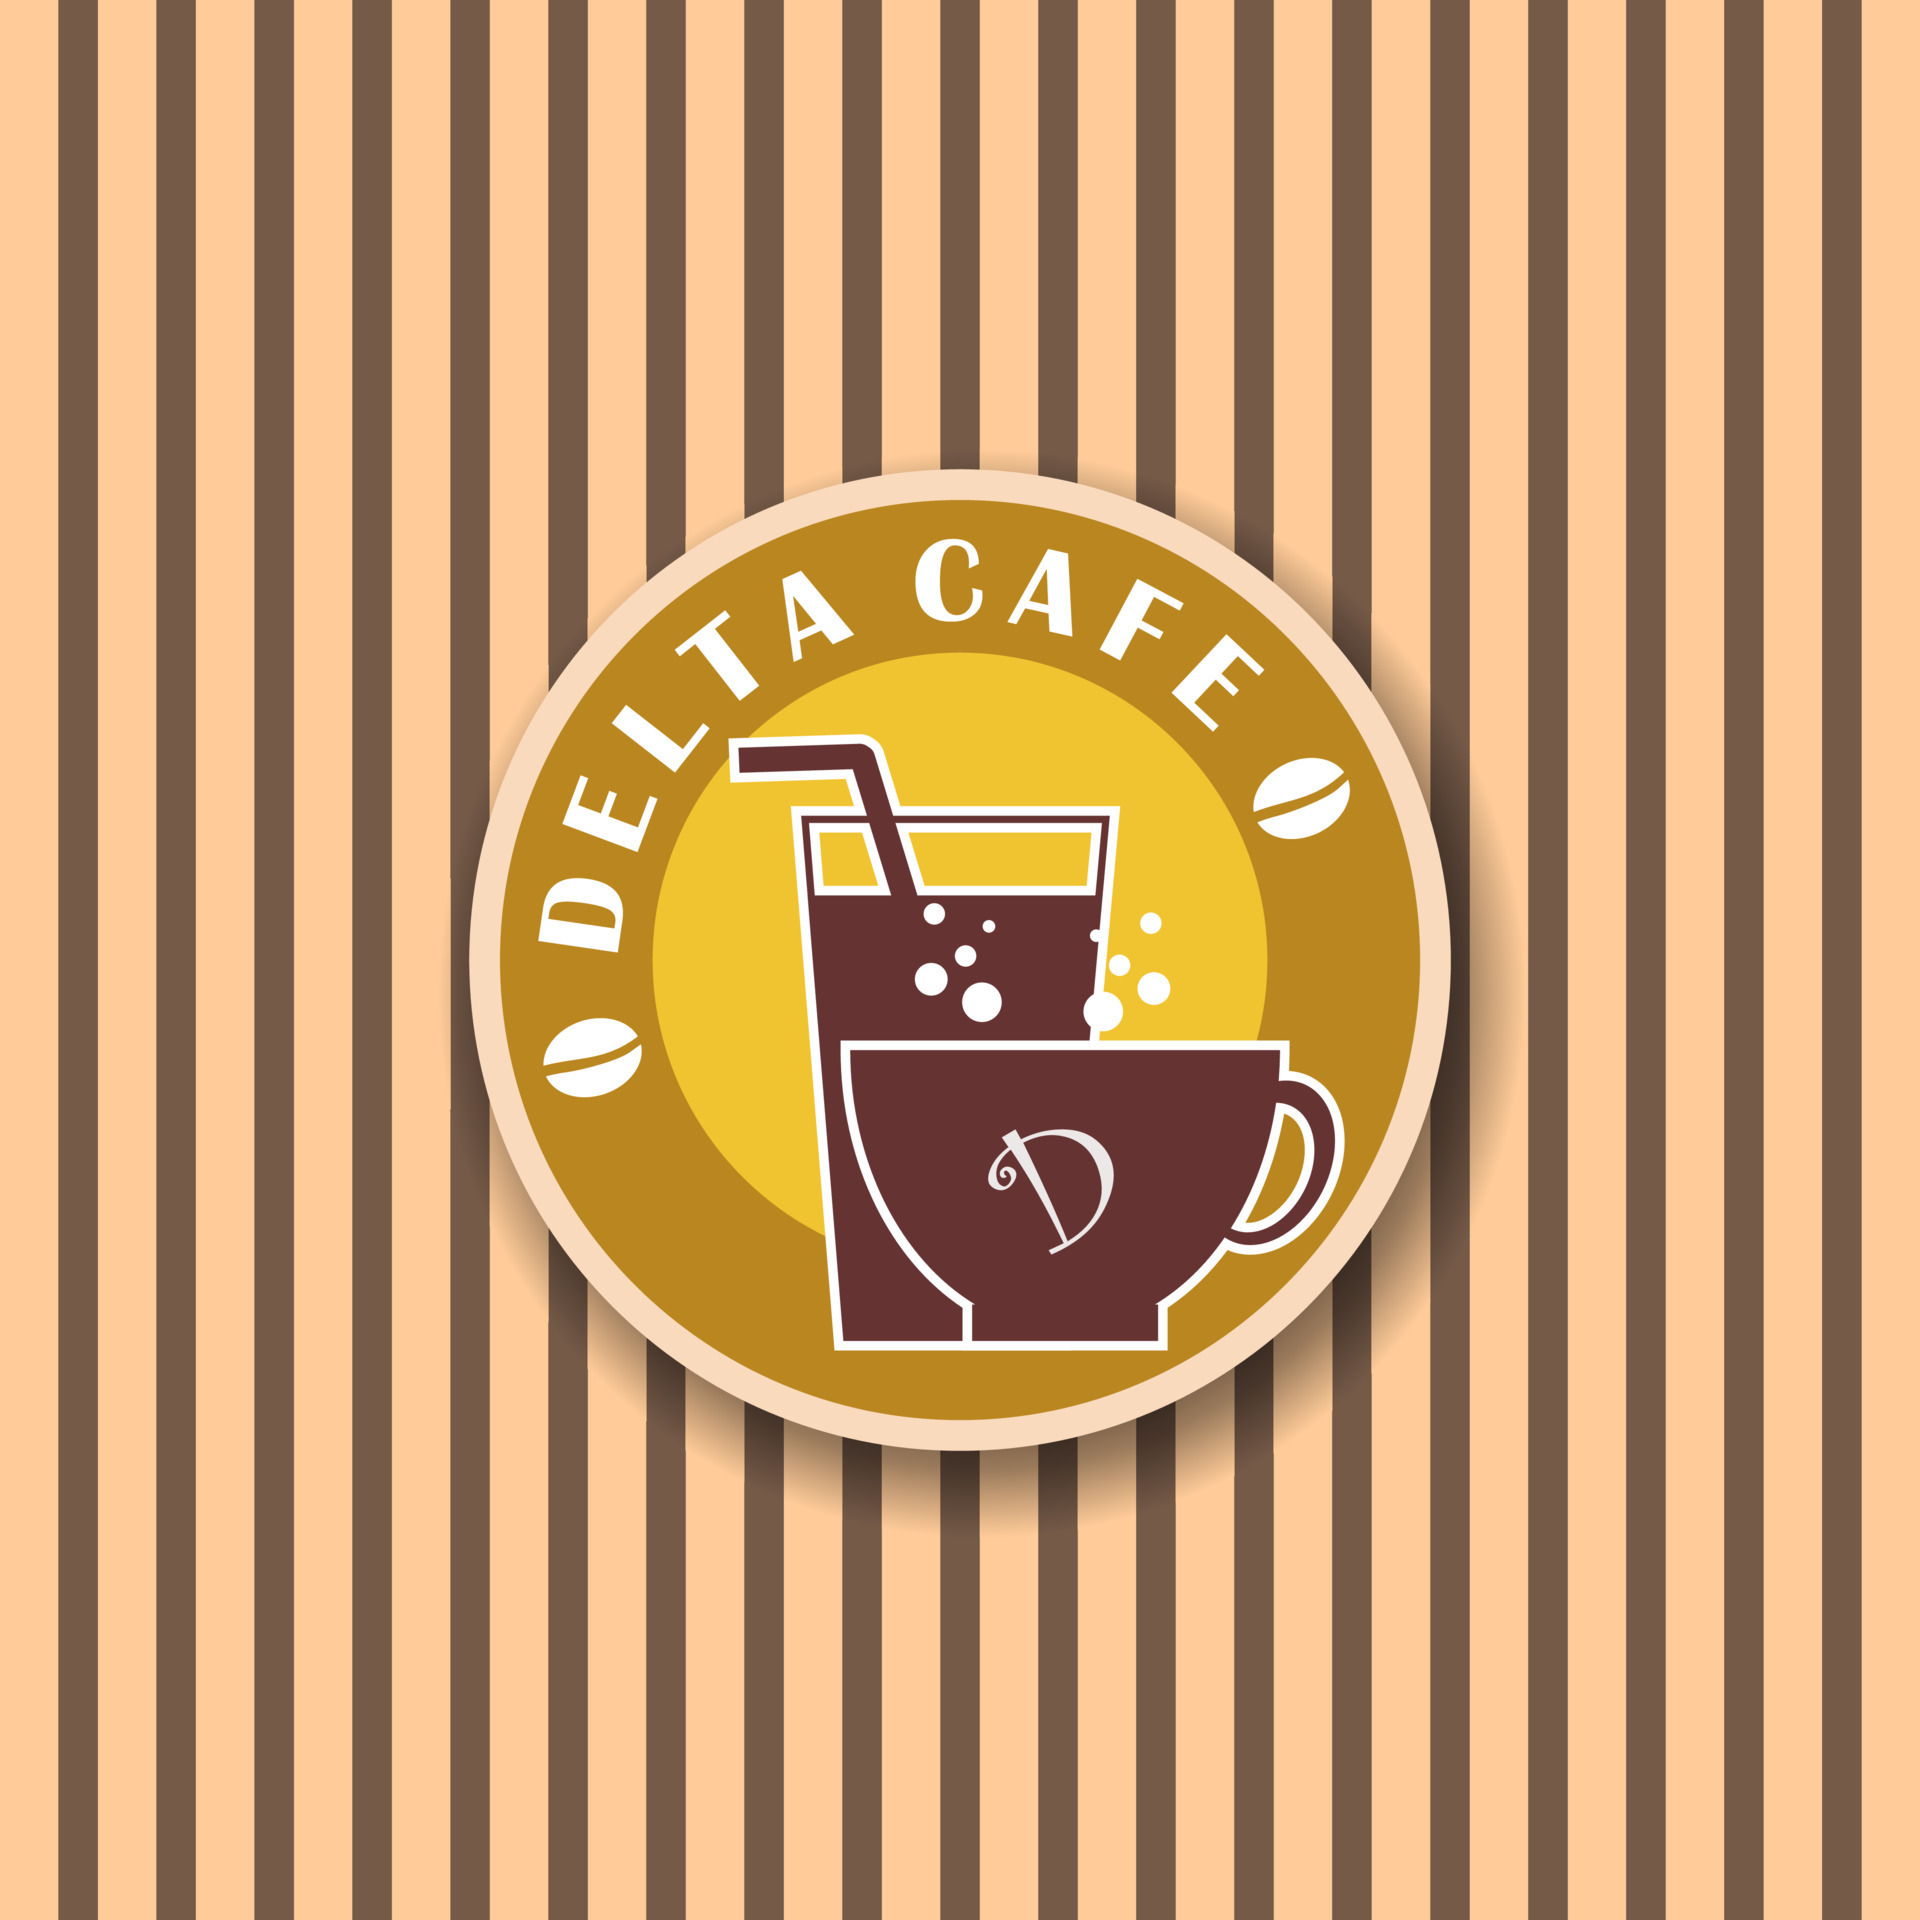 Delta Café – Packaging Of The World